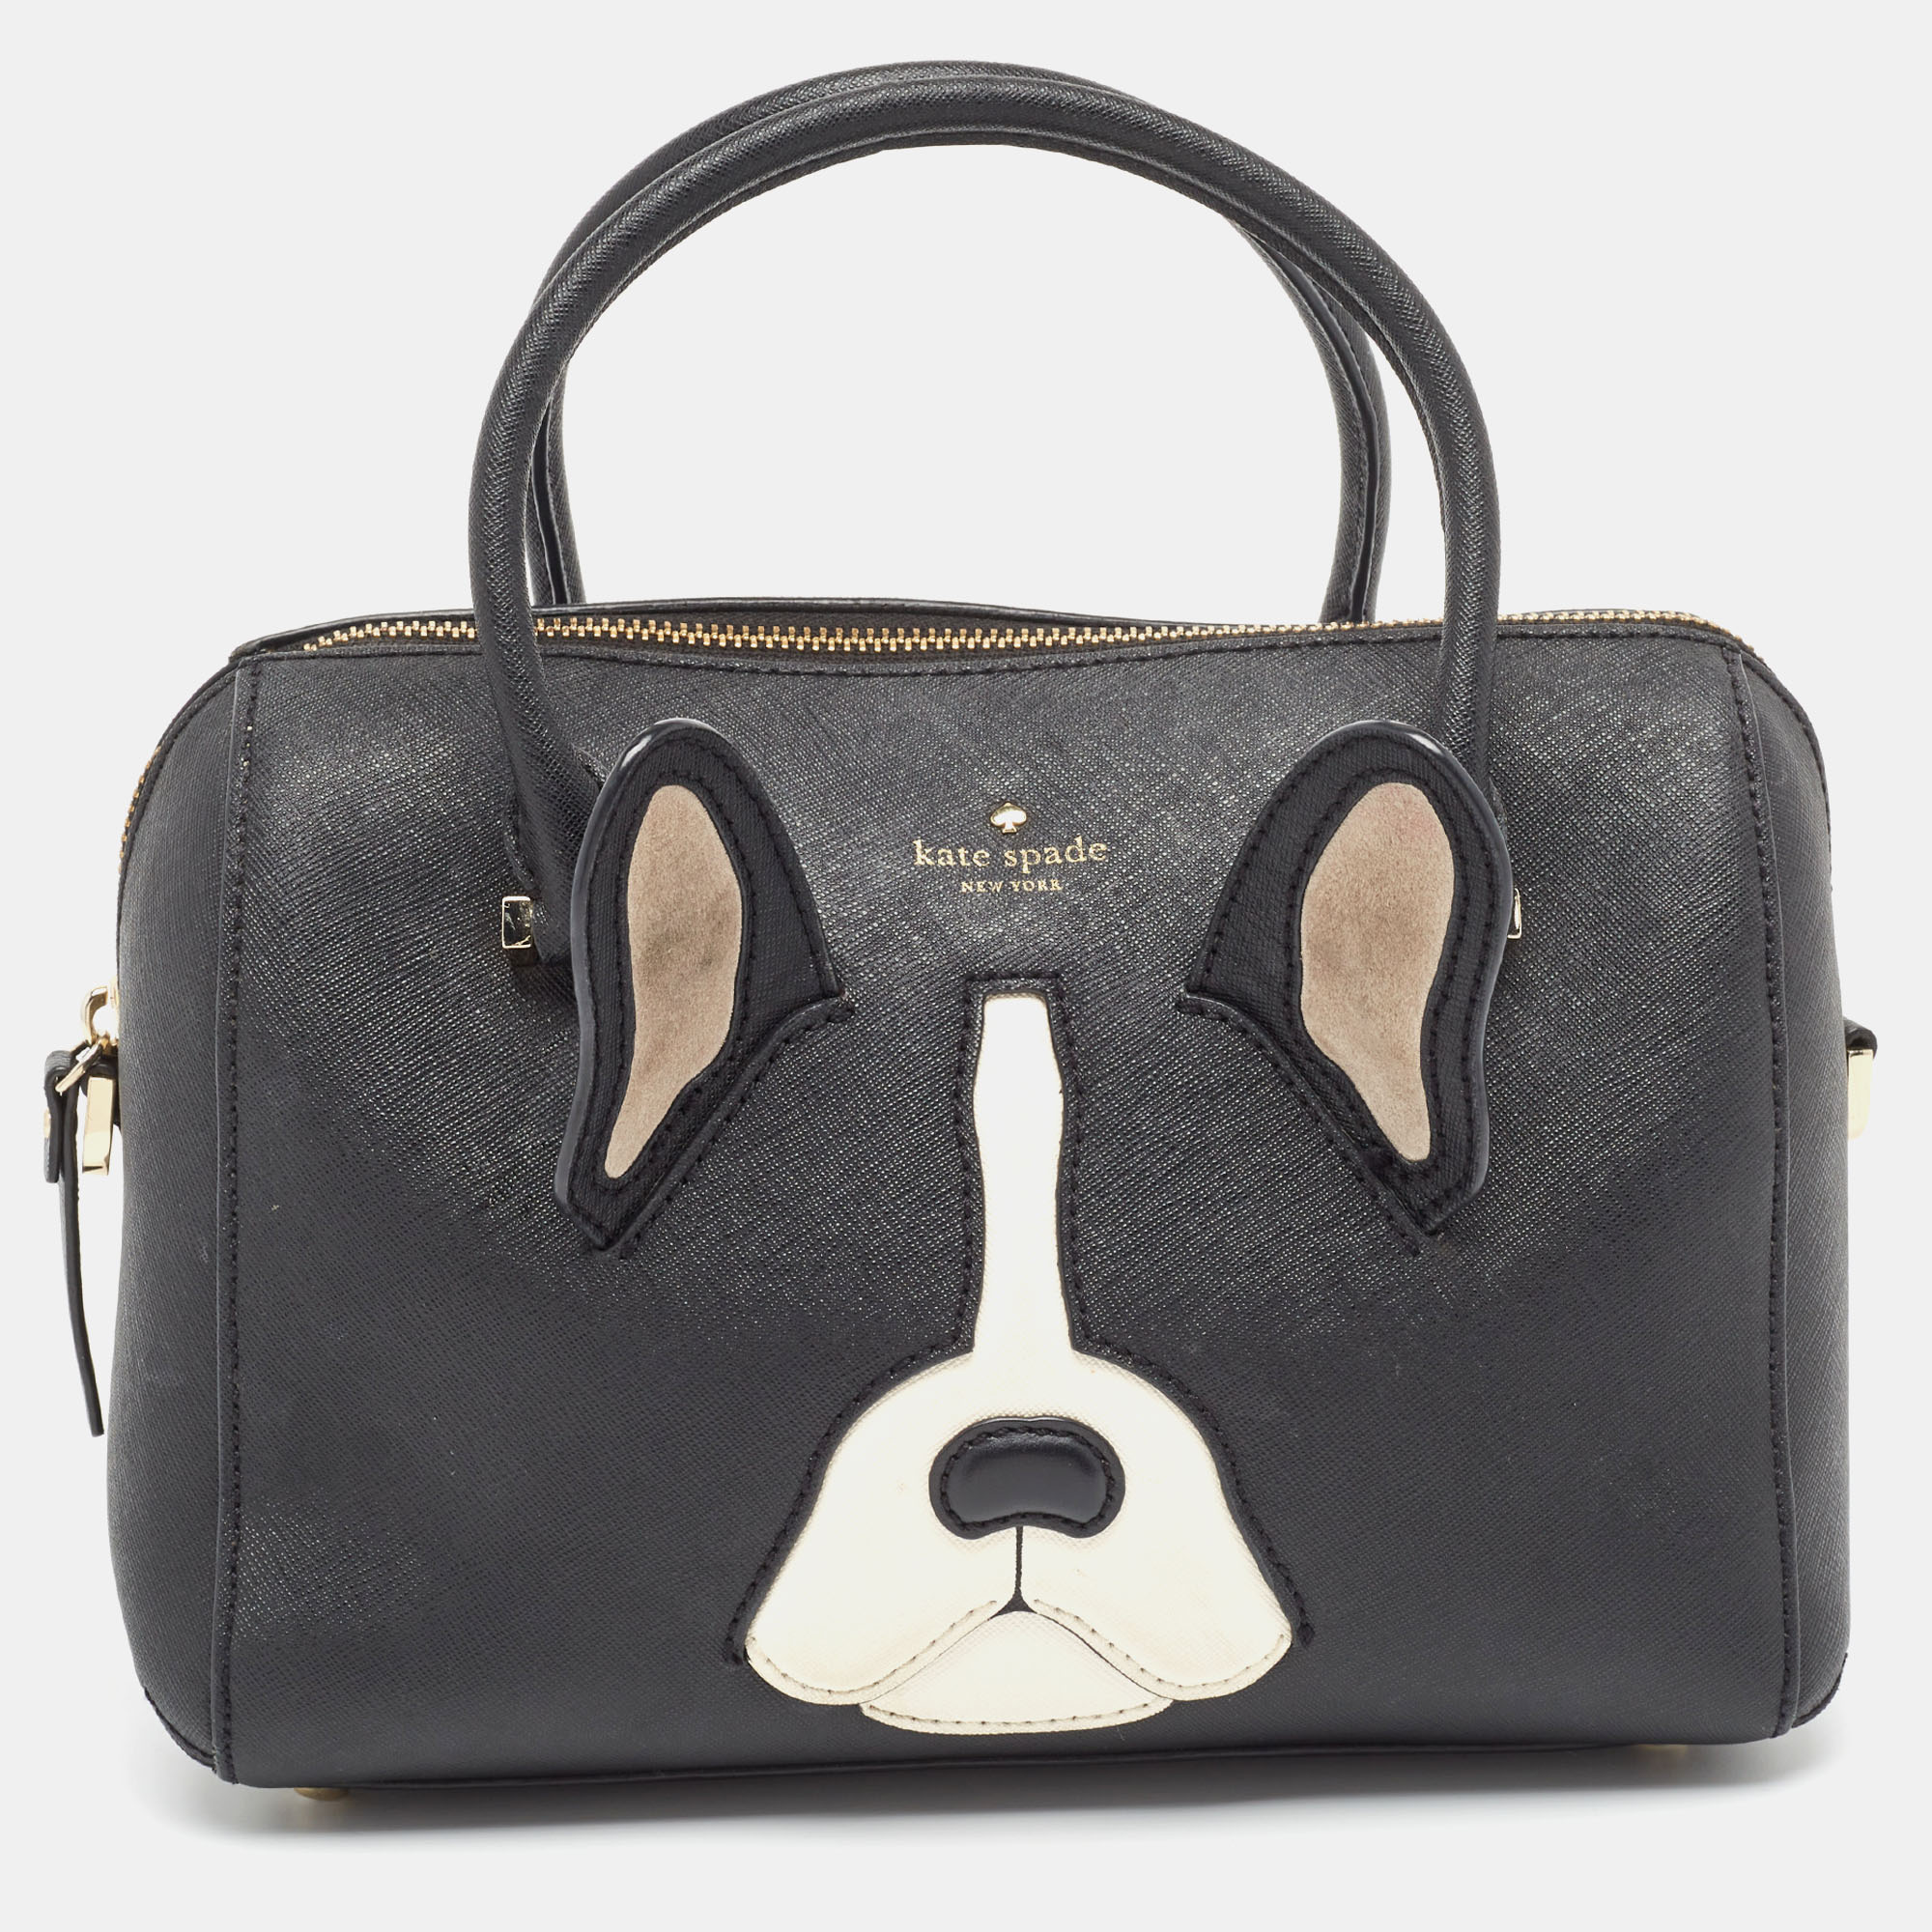 Pre-owned Kate Spade Black Leather French Bulldog Satchel